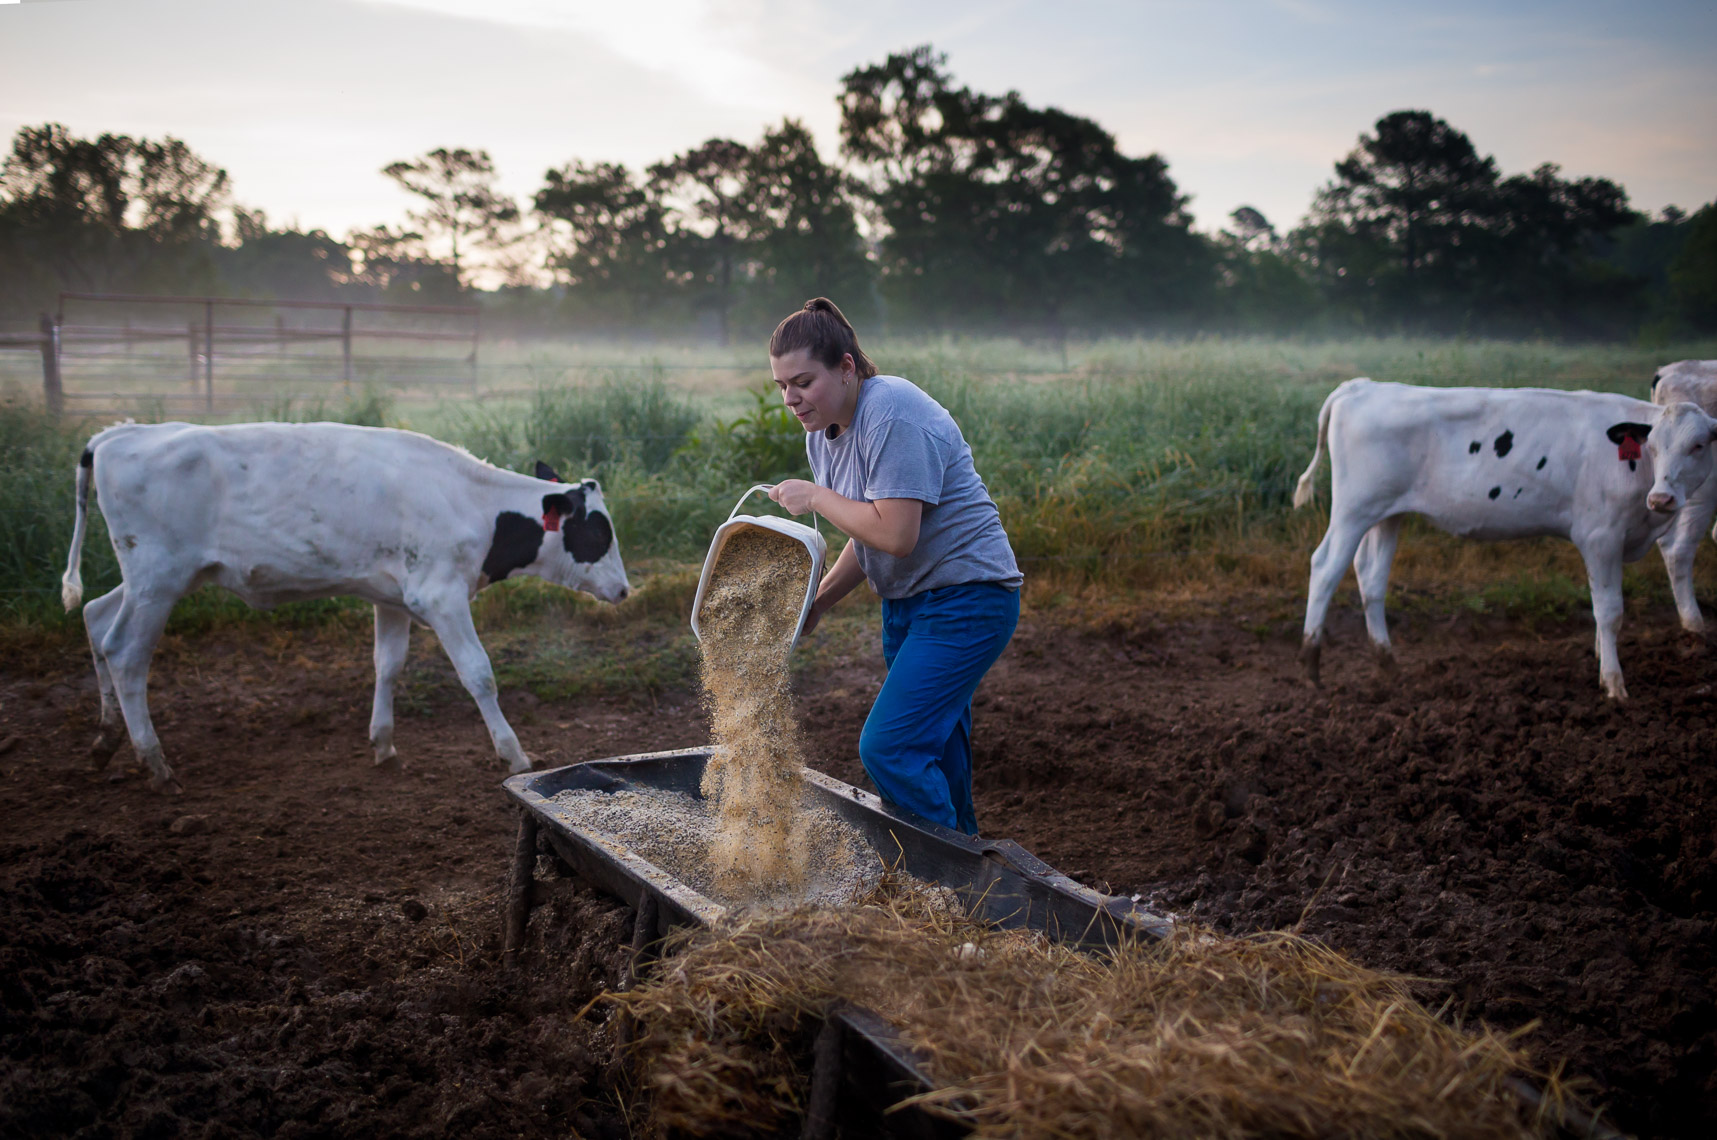 NC_State_Dairy_Farm_for_Walter_Magazine_20190501_photo_by_Justin_Kase_Conder_0225_Retouched_V01